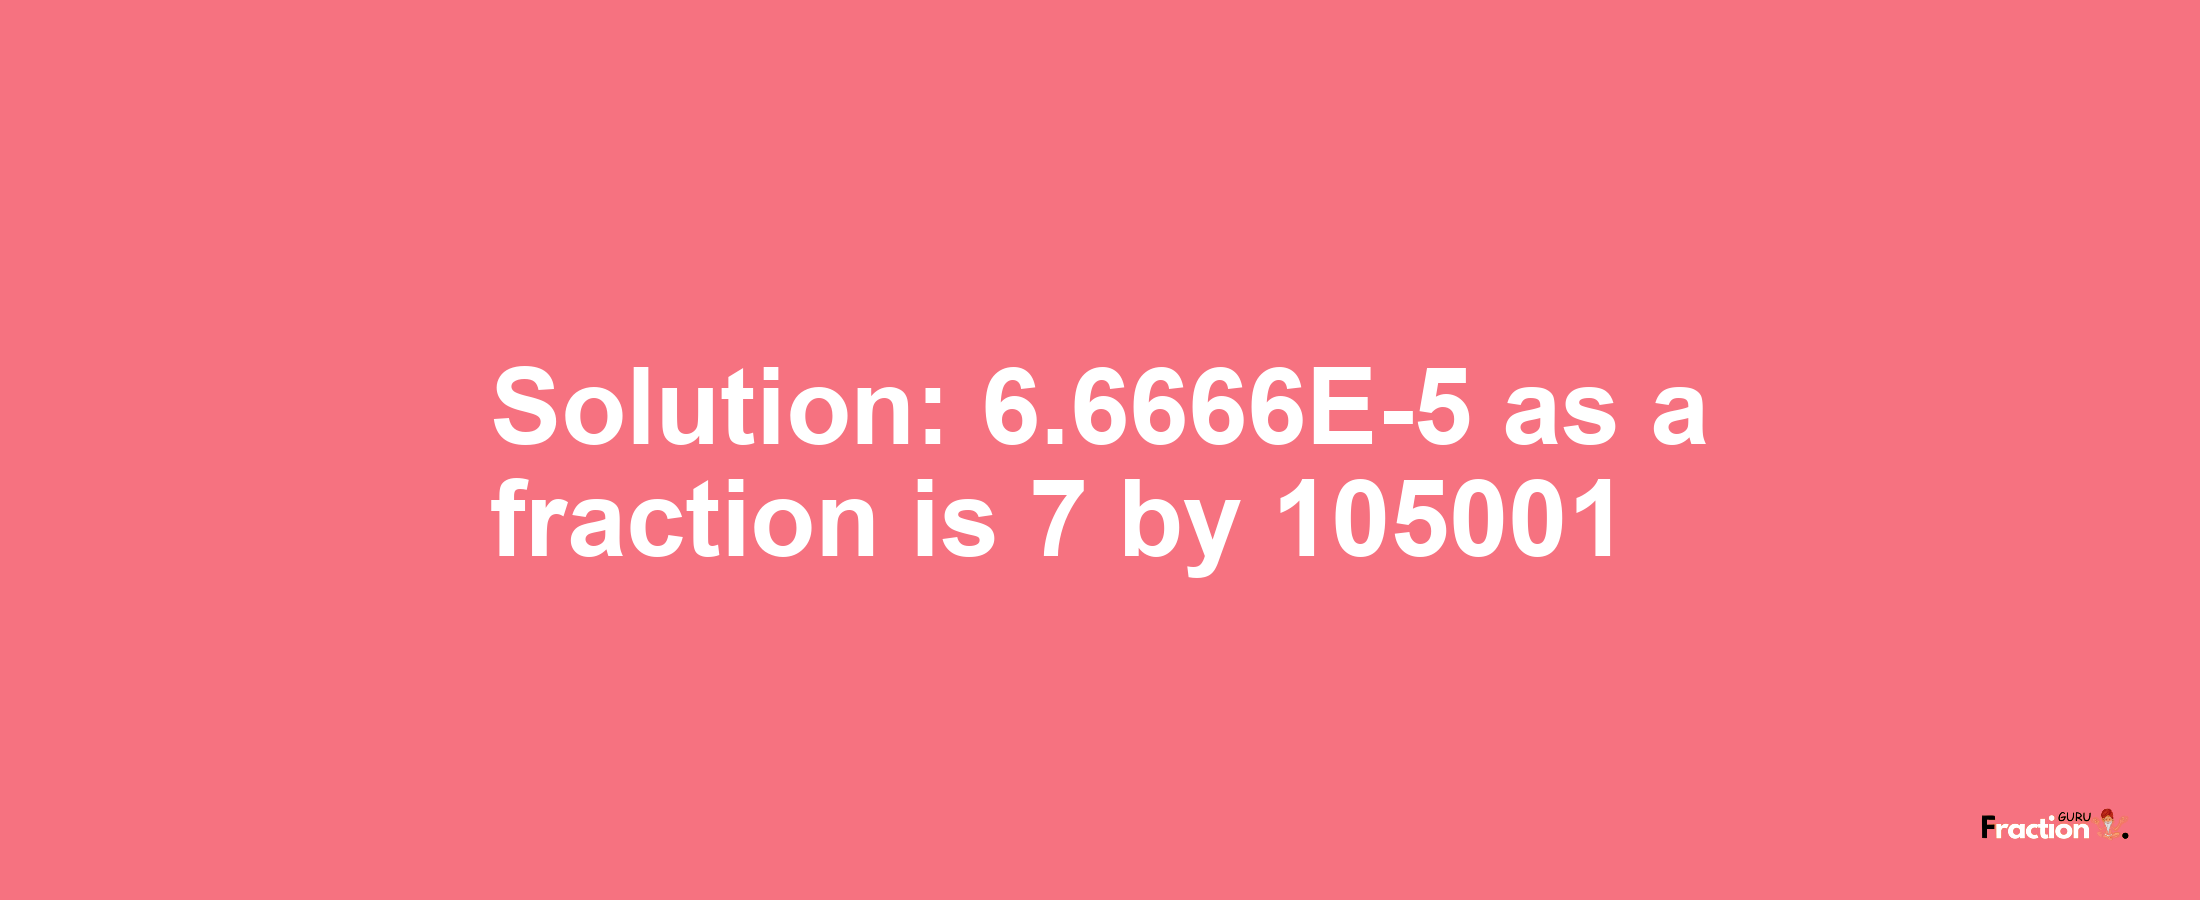 Solution:6.6666E-5 as a fraction is 7/105001